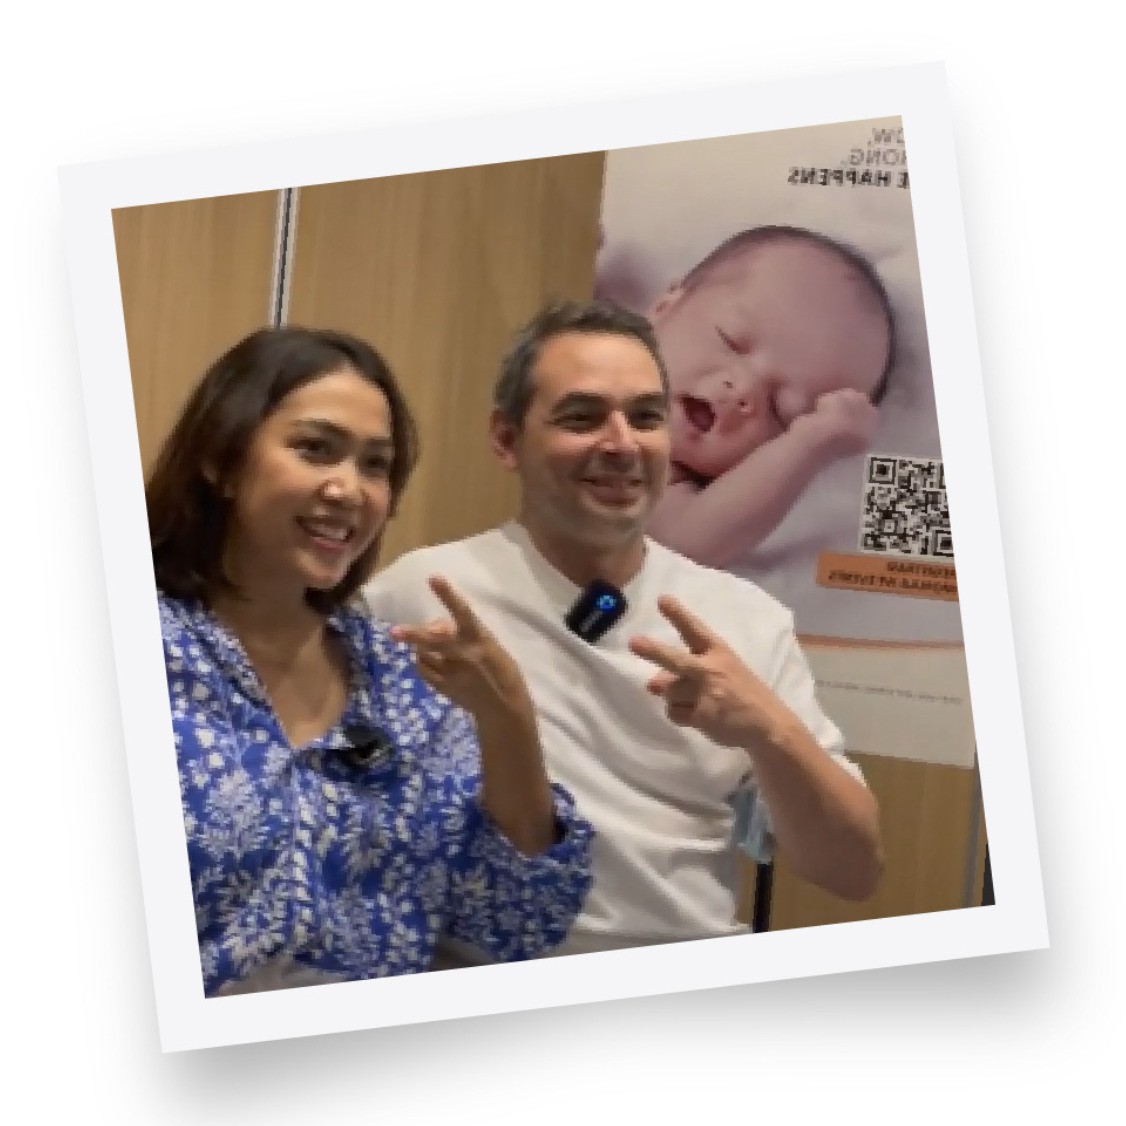 "The first attempt was successful, so we are really grateful to Morula because it really worked well" <br> Mom Atid & Dad Marco